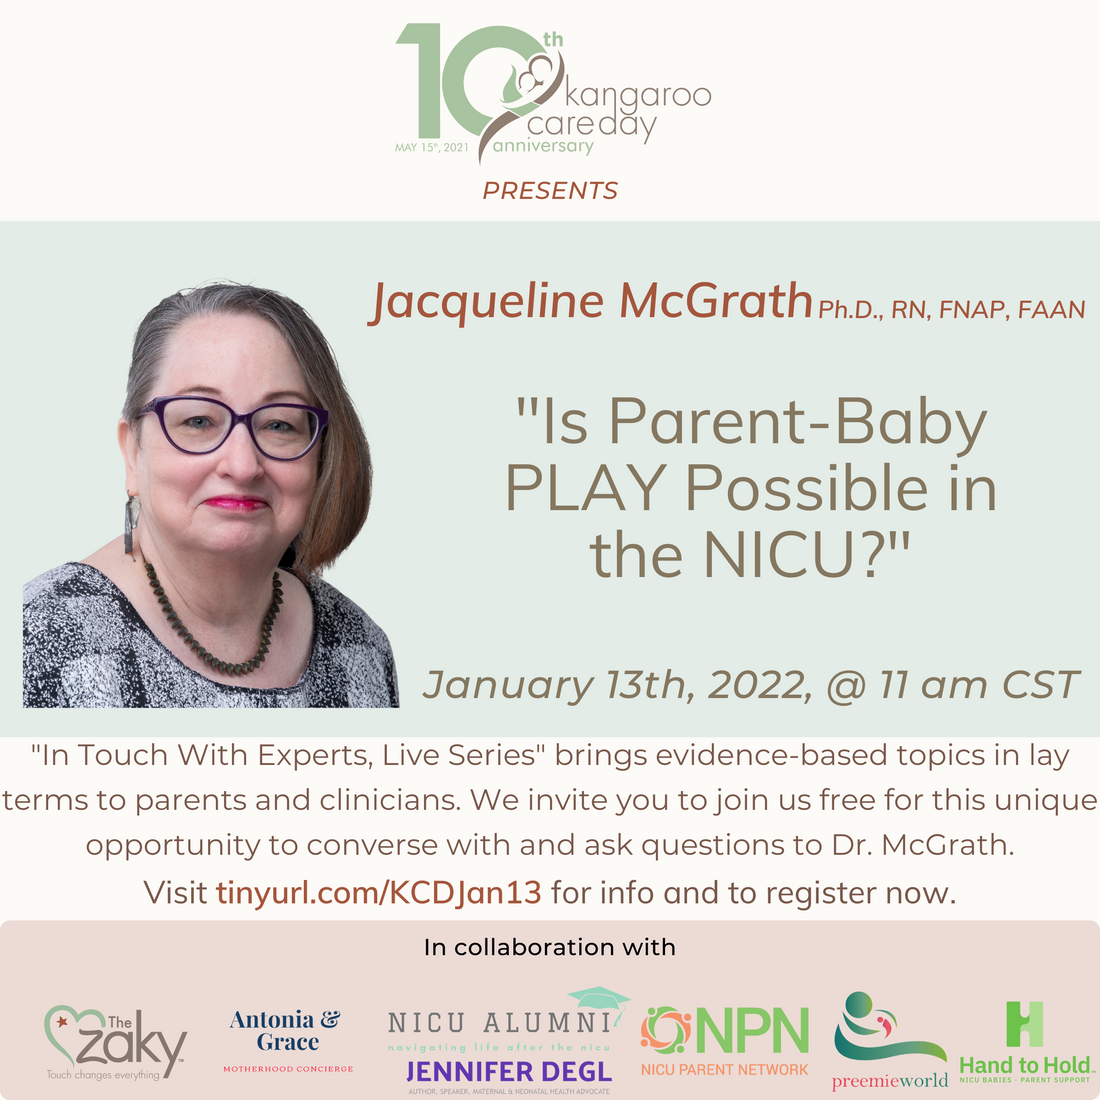 "In Touch With Experts, LIVE" presents "Is Parent-Baby PLAY Possible in the NICU?" with Dr. Jacqueline M. McGrath